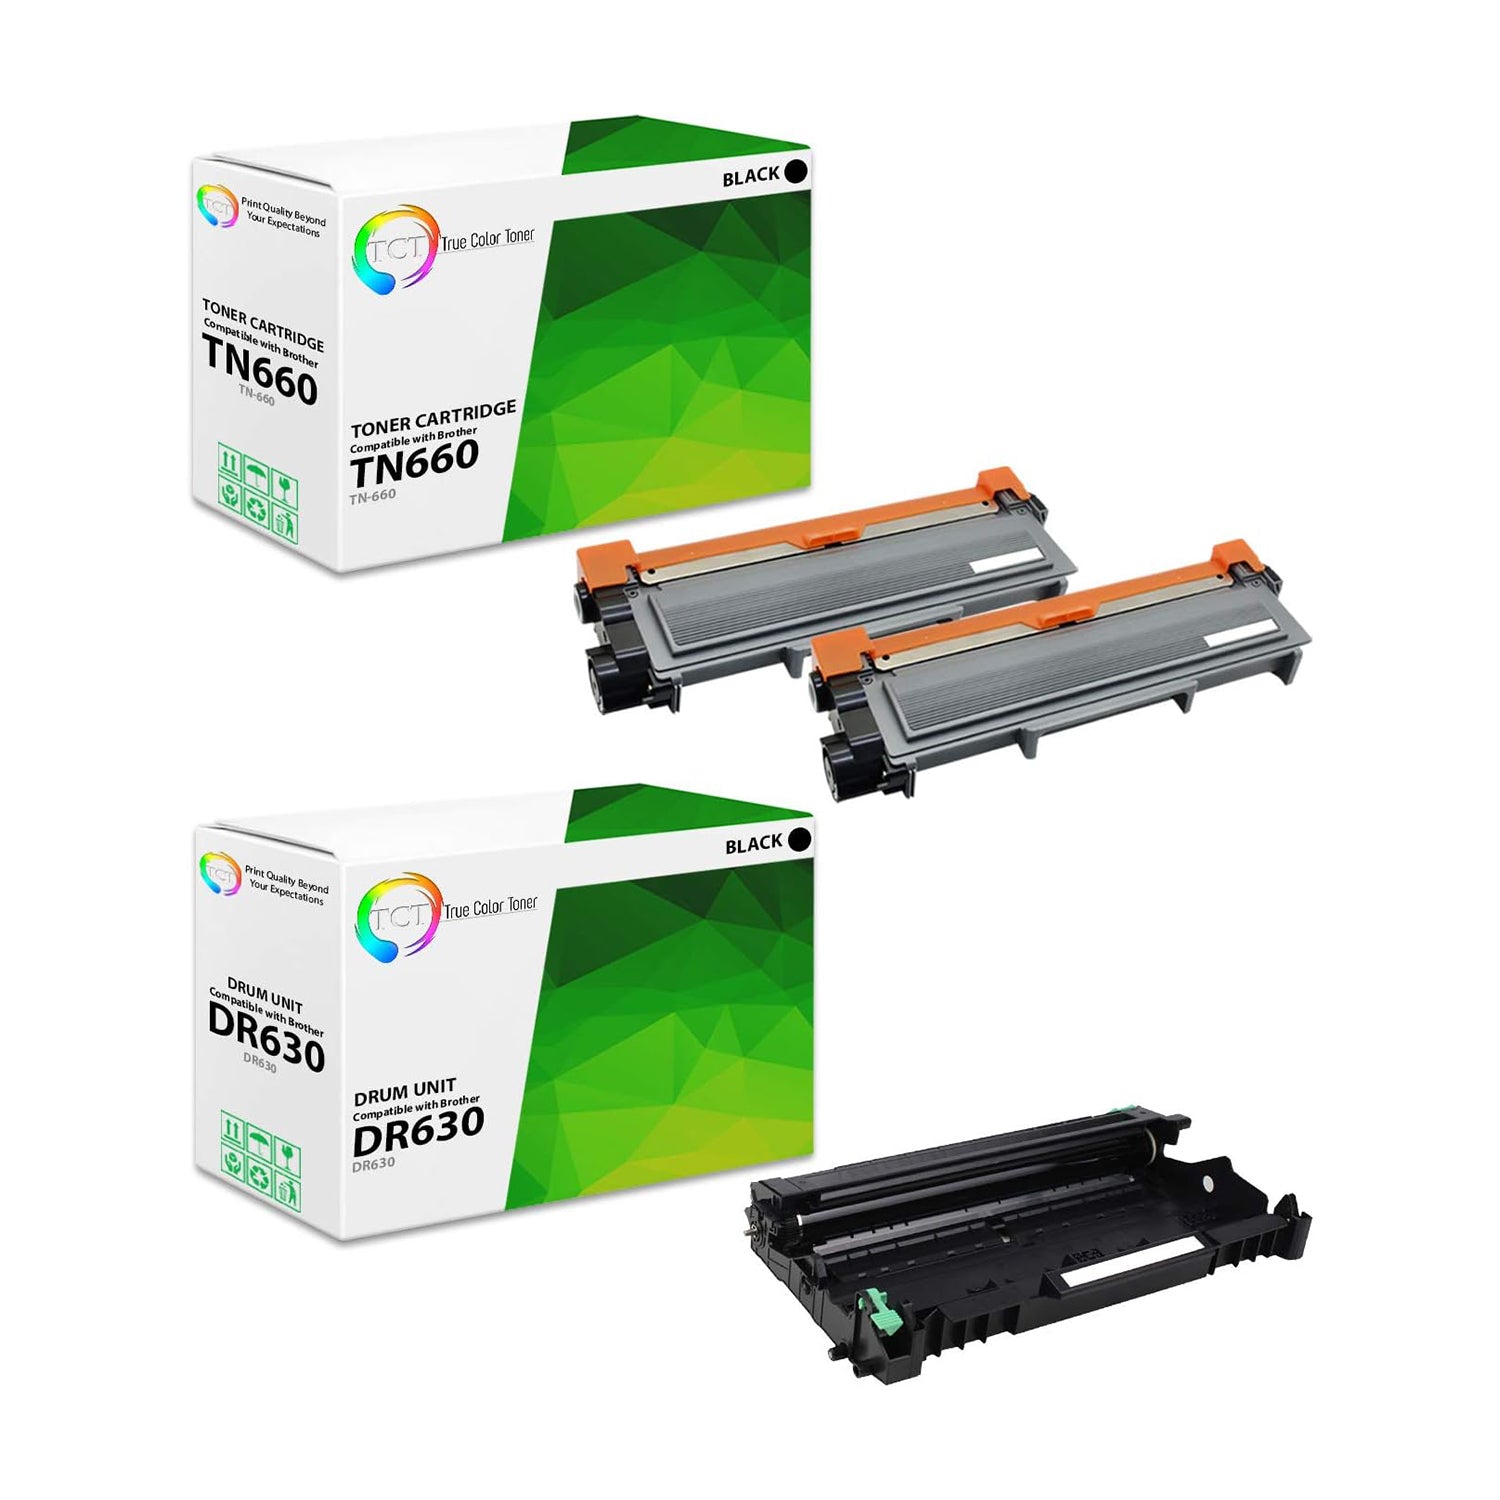 TCT Compatible Toner Cartridge and Drum Replacement for the Brother TN660 DR630 Series - 3 Pack